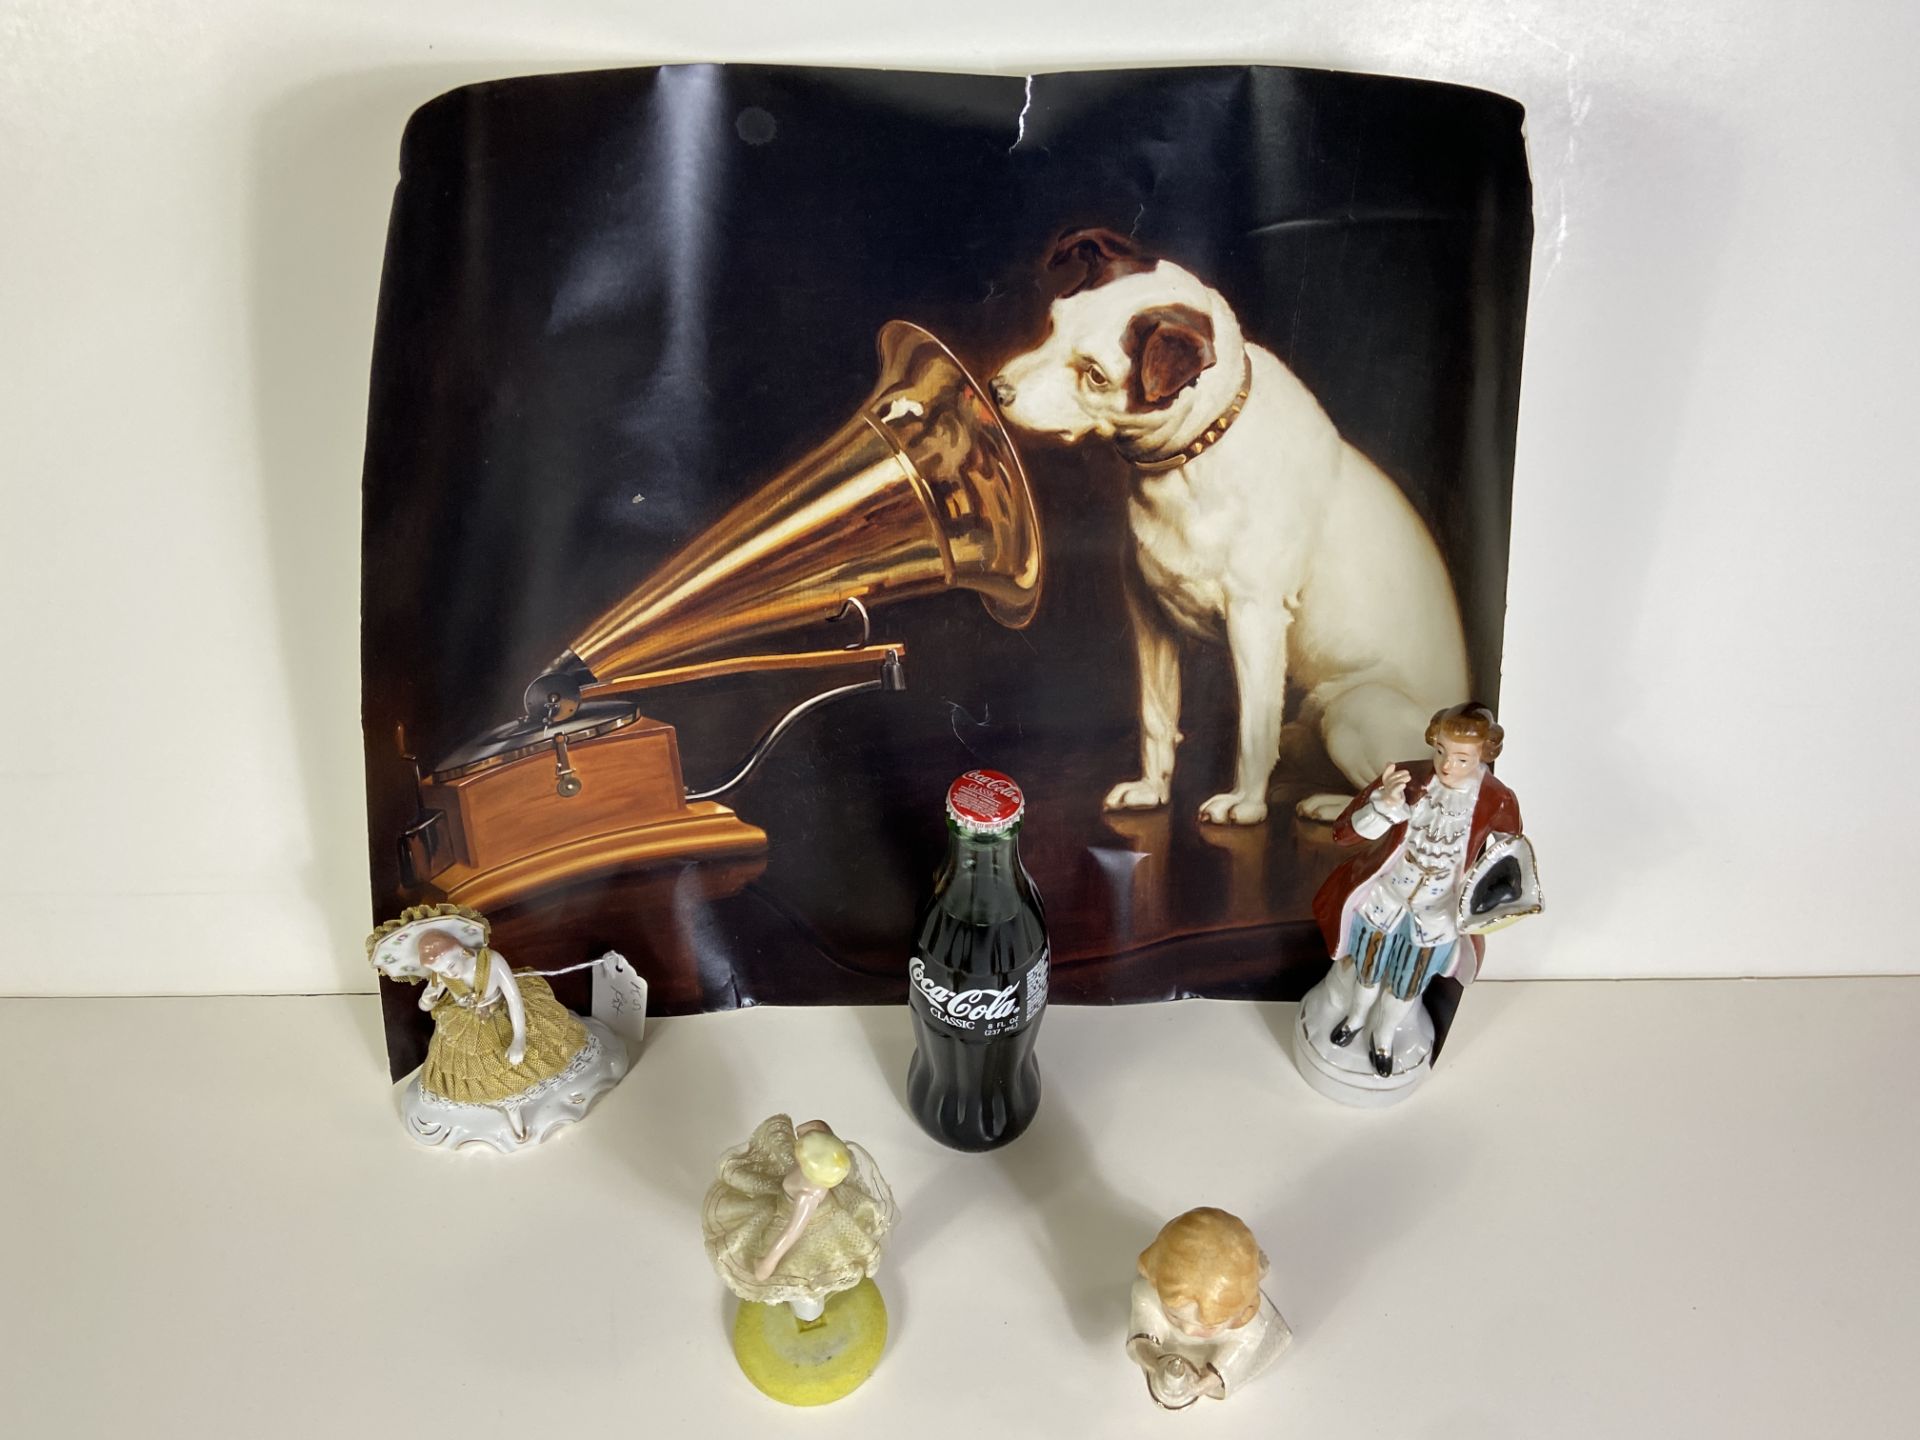 4 Collectable Figures, Vintage Glass Unopened Coke Bottle, Dog with Record Player Poster